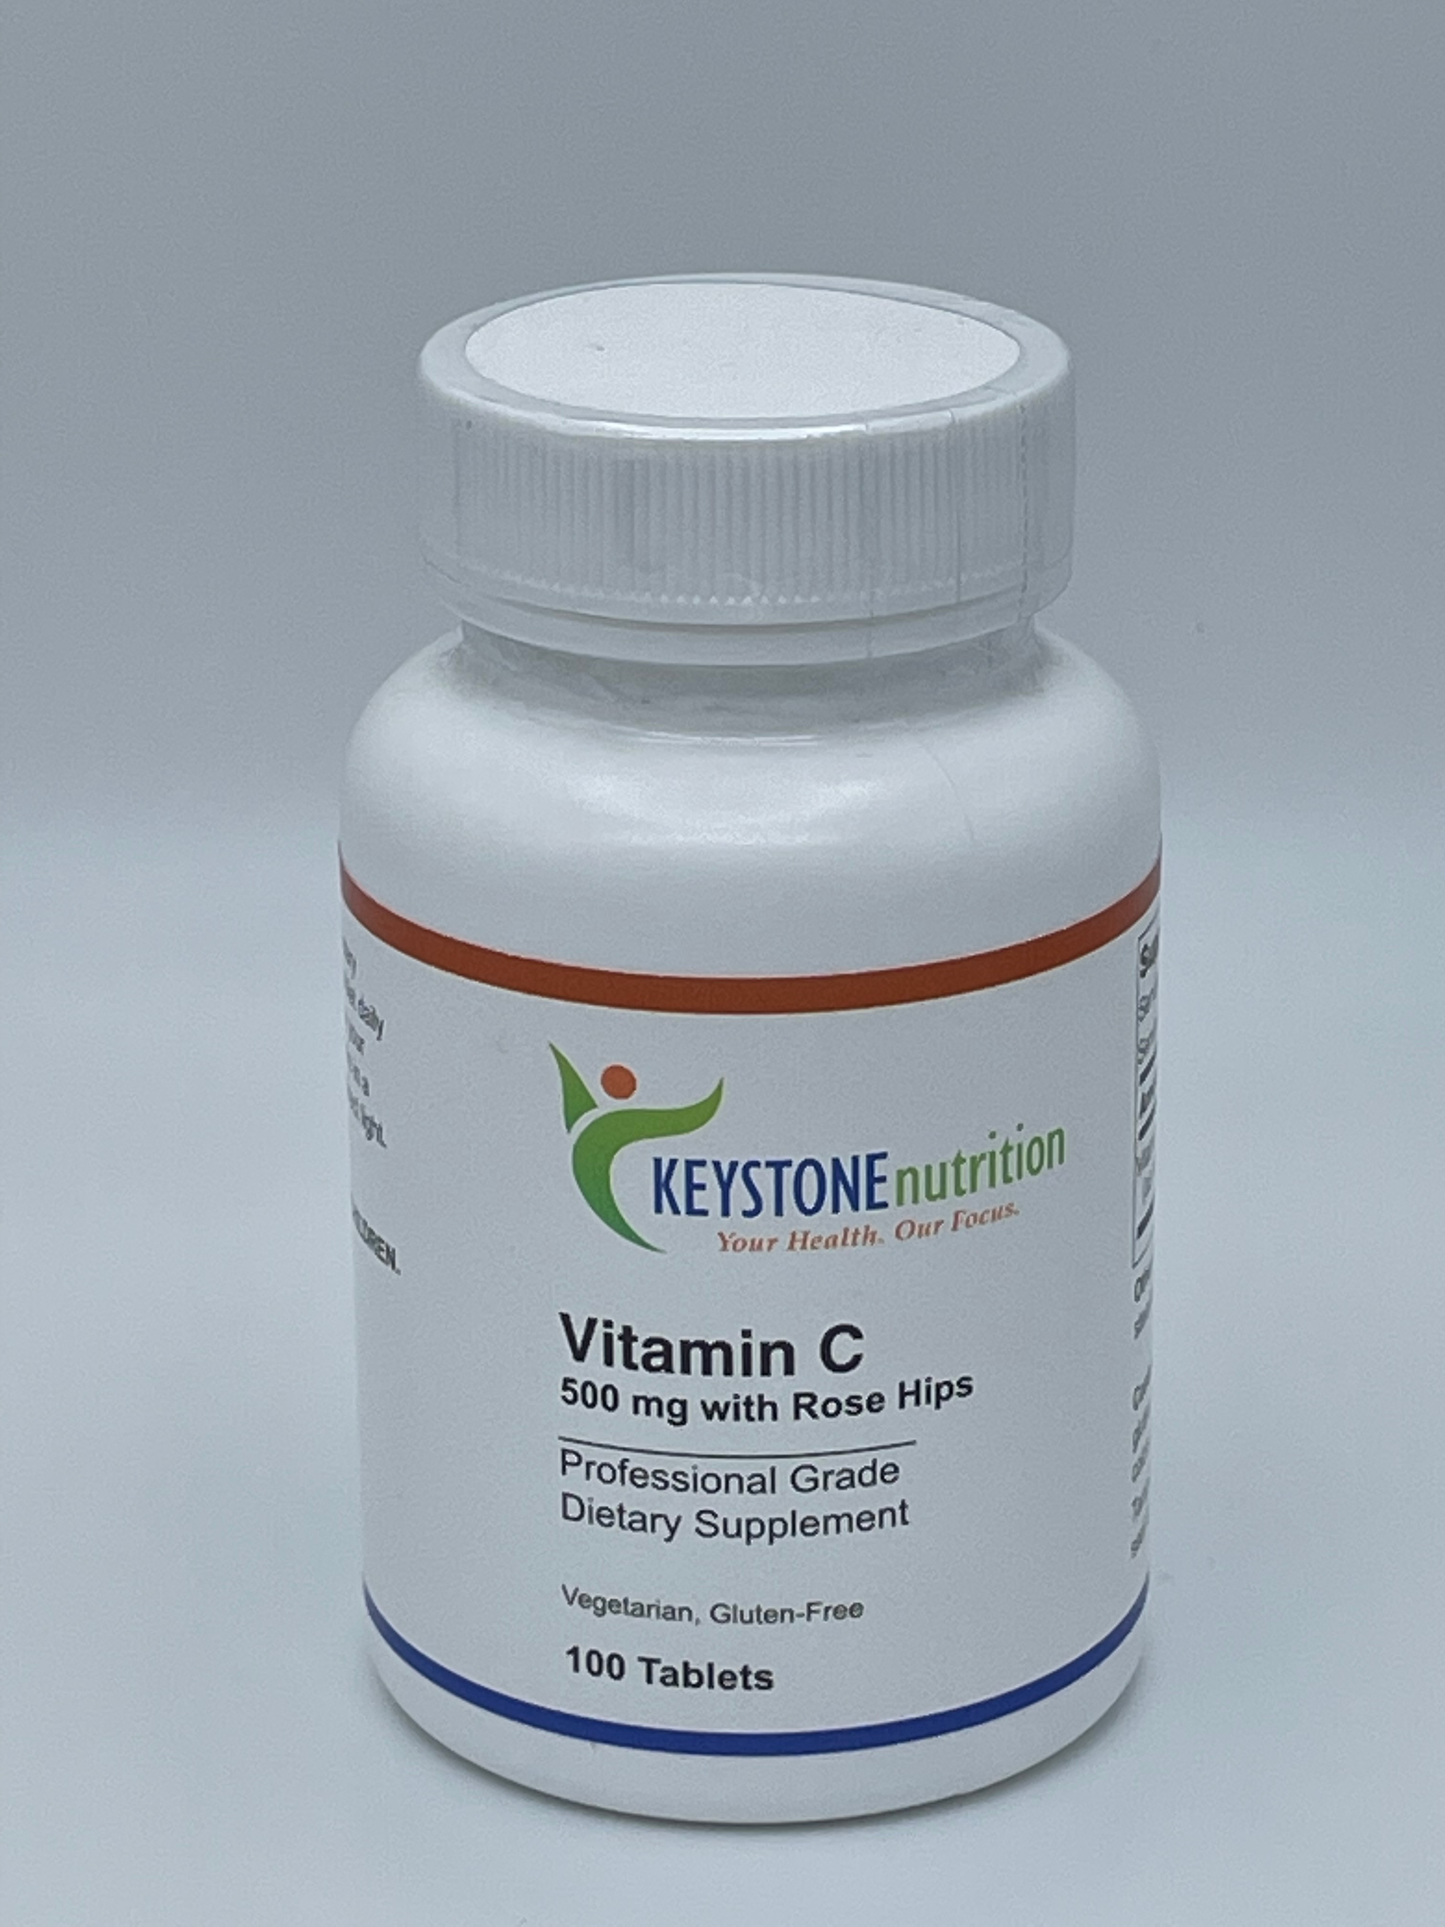 Vitamin C 500 mg / with Rose Hips